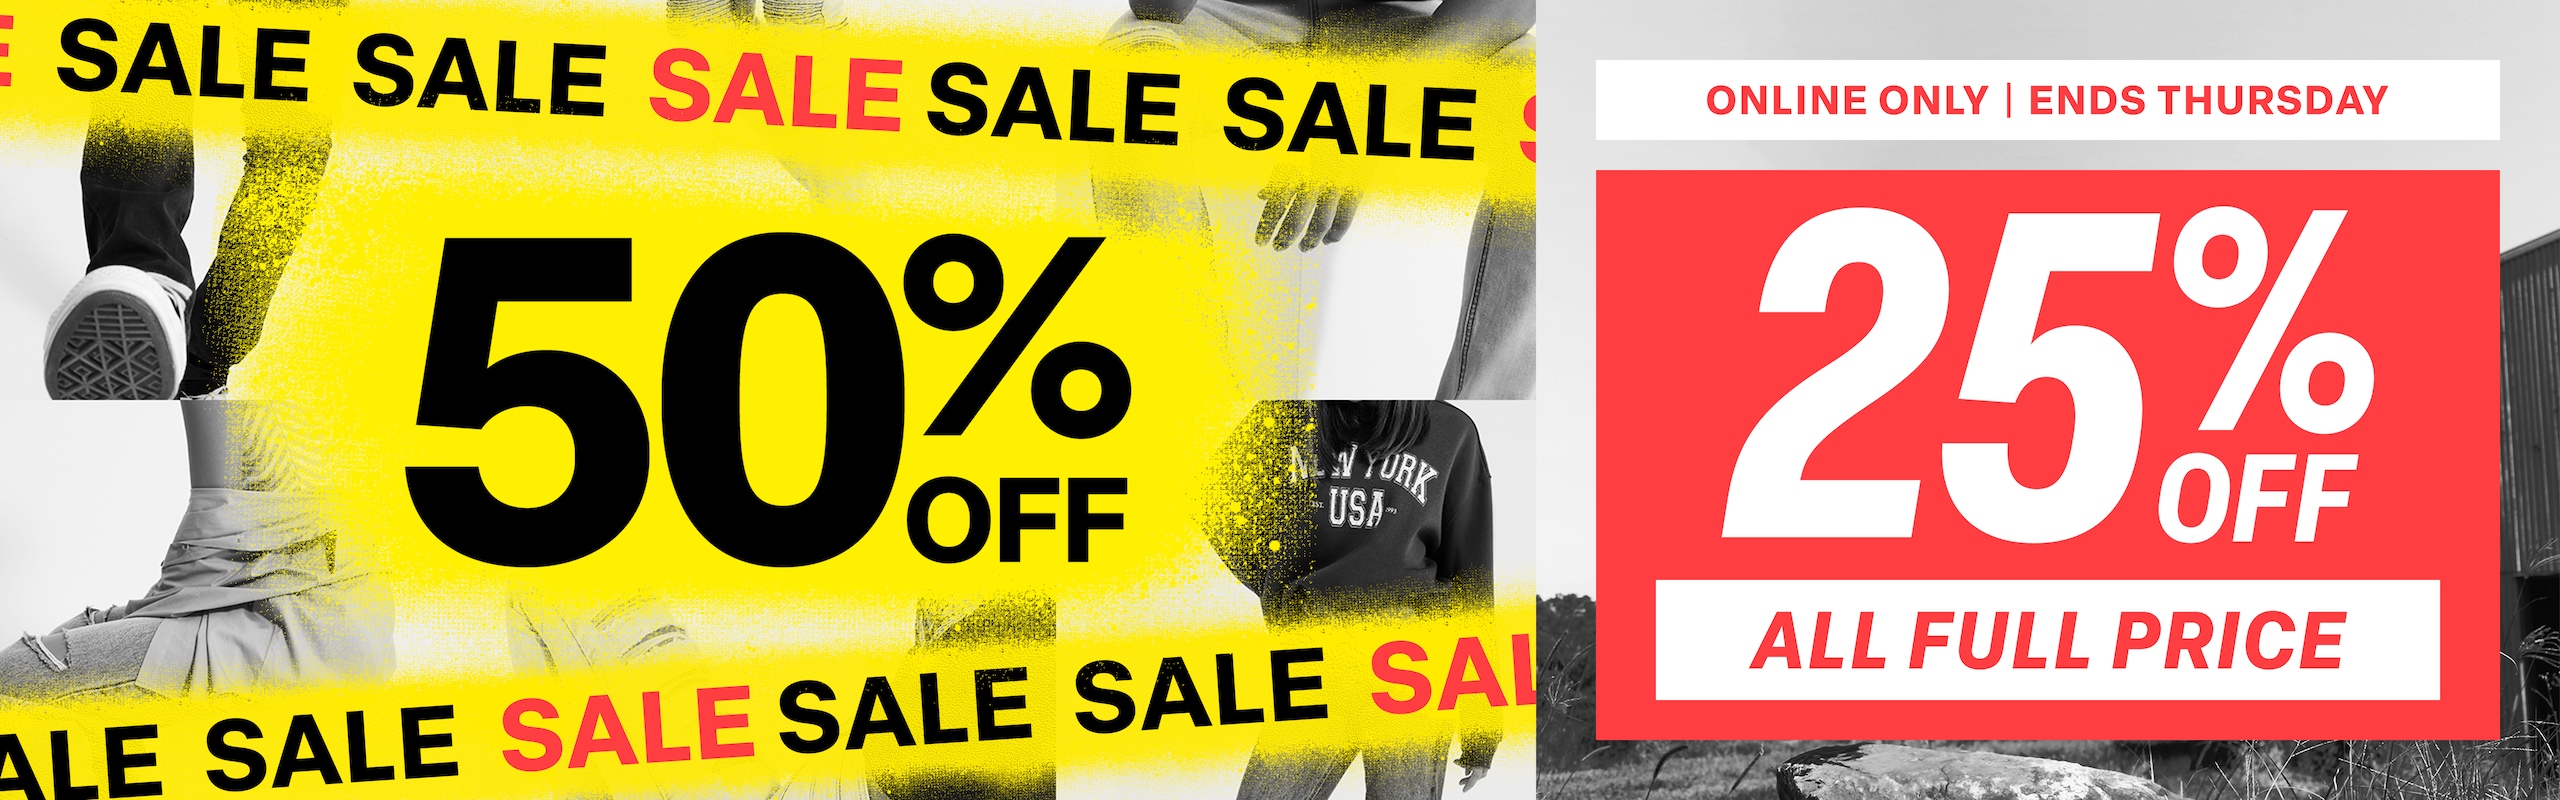 Sale. 50% Off. Online Only. Ends Thursday. 25% Off All Full Price